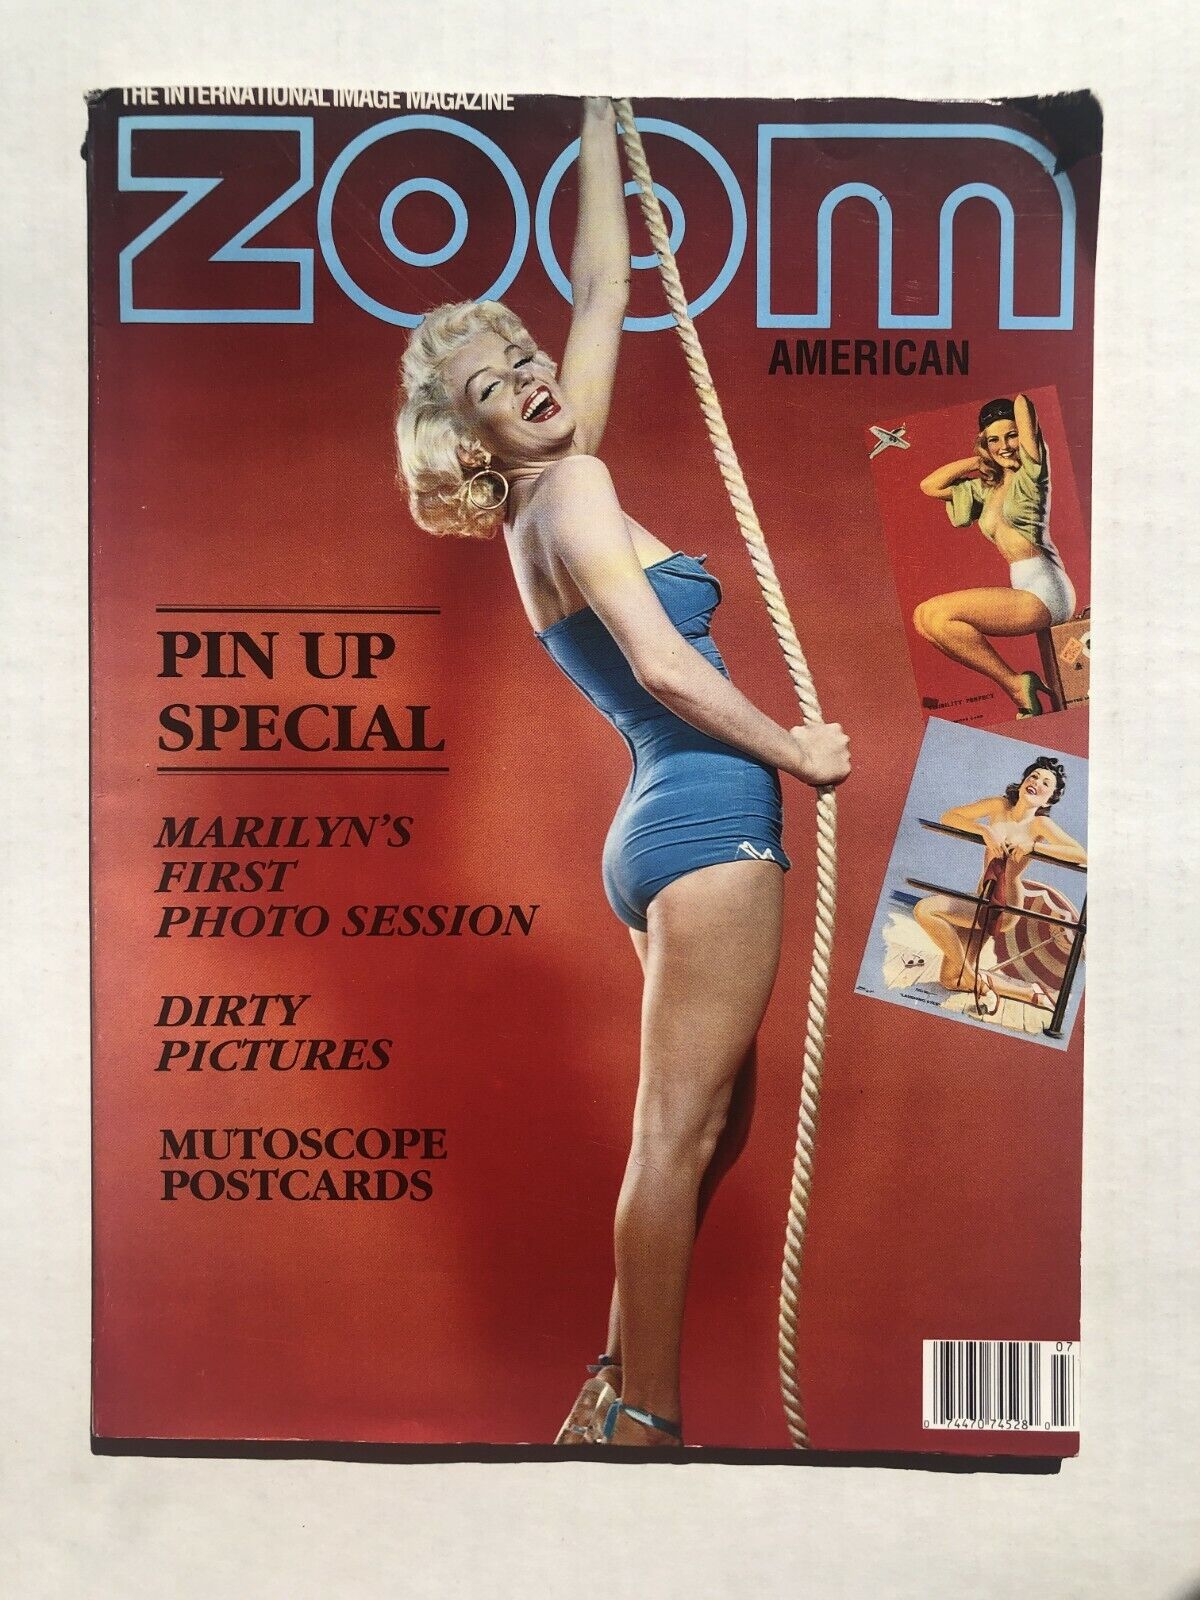 1989 Zoom Magazine Pinup Girl Issue w/ Marilyn Monroe's First Photo Shoot